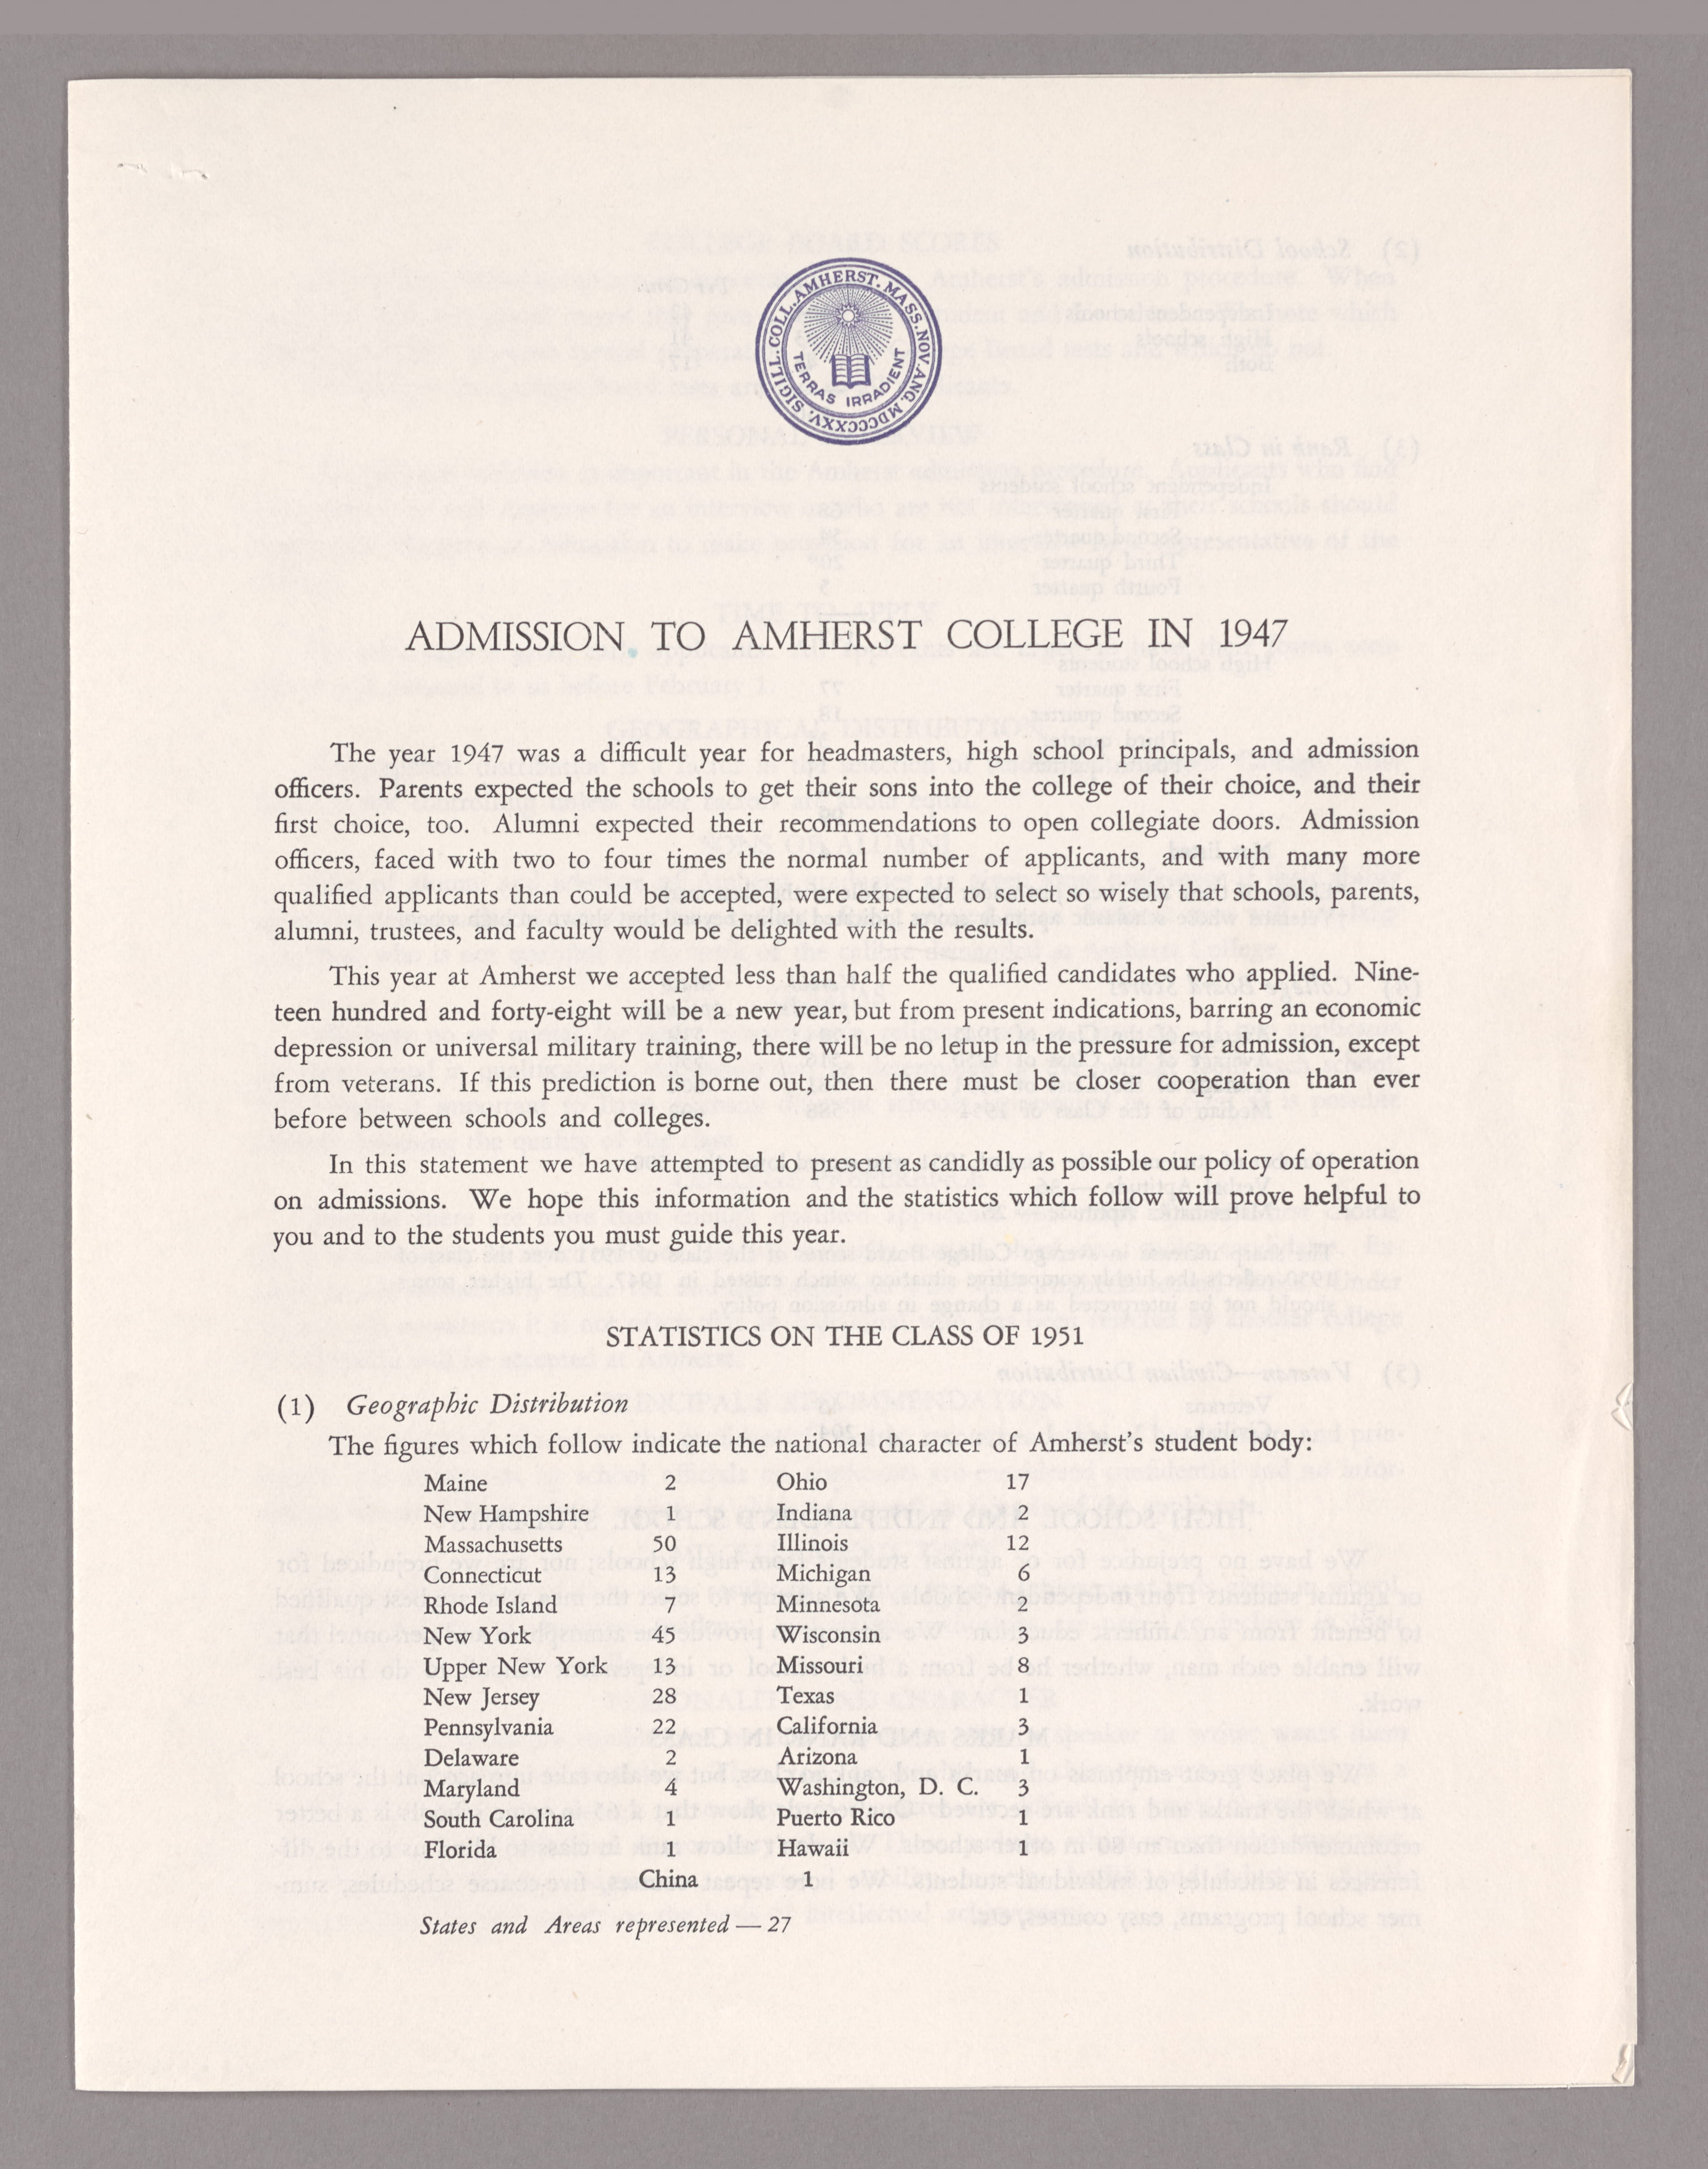 Amherst College admissions report to secondary schools, 1947